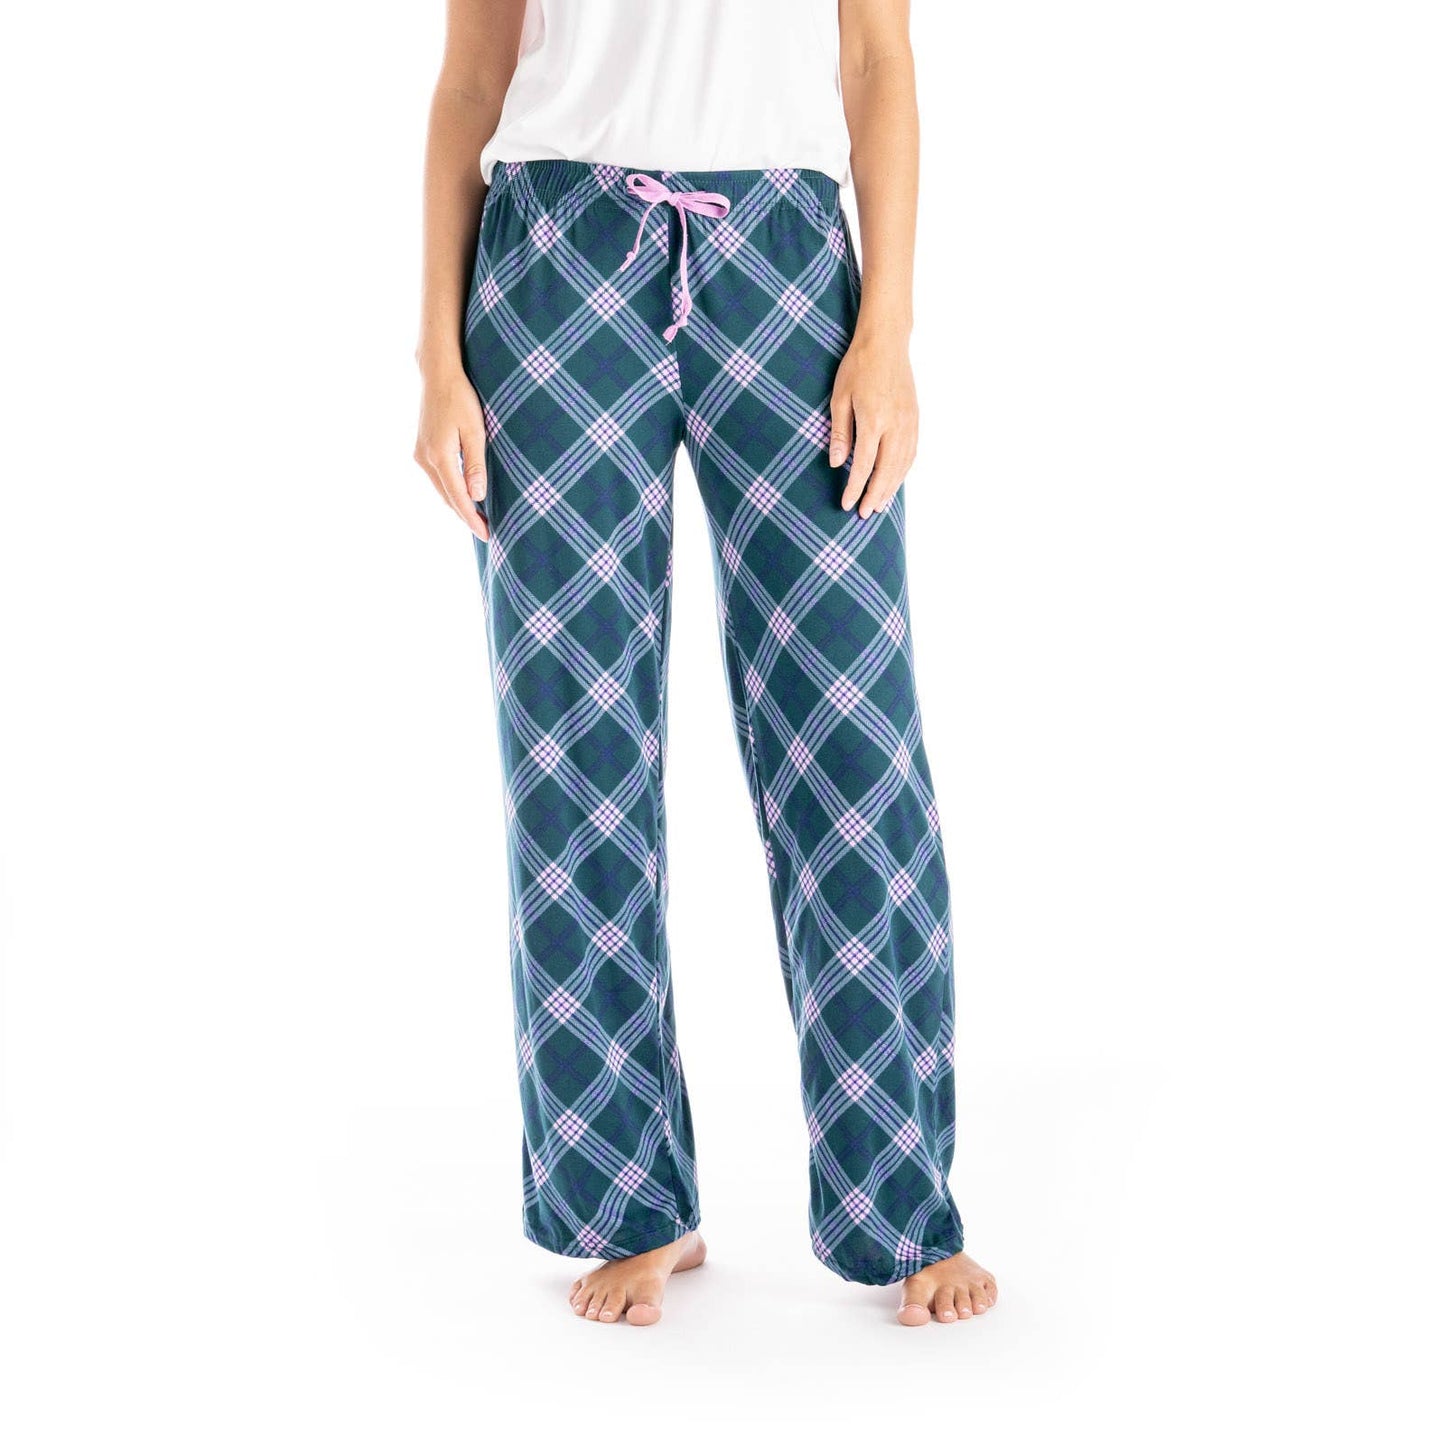 Hello Mello Daydream Lounge Pants Open Stock: Medium/Large / Be a Wildflower